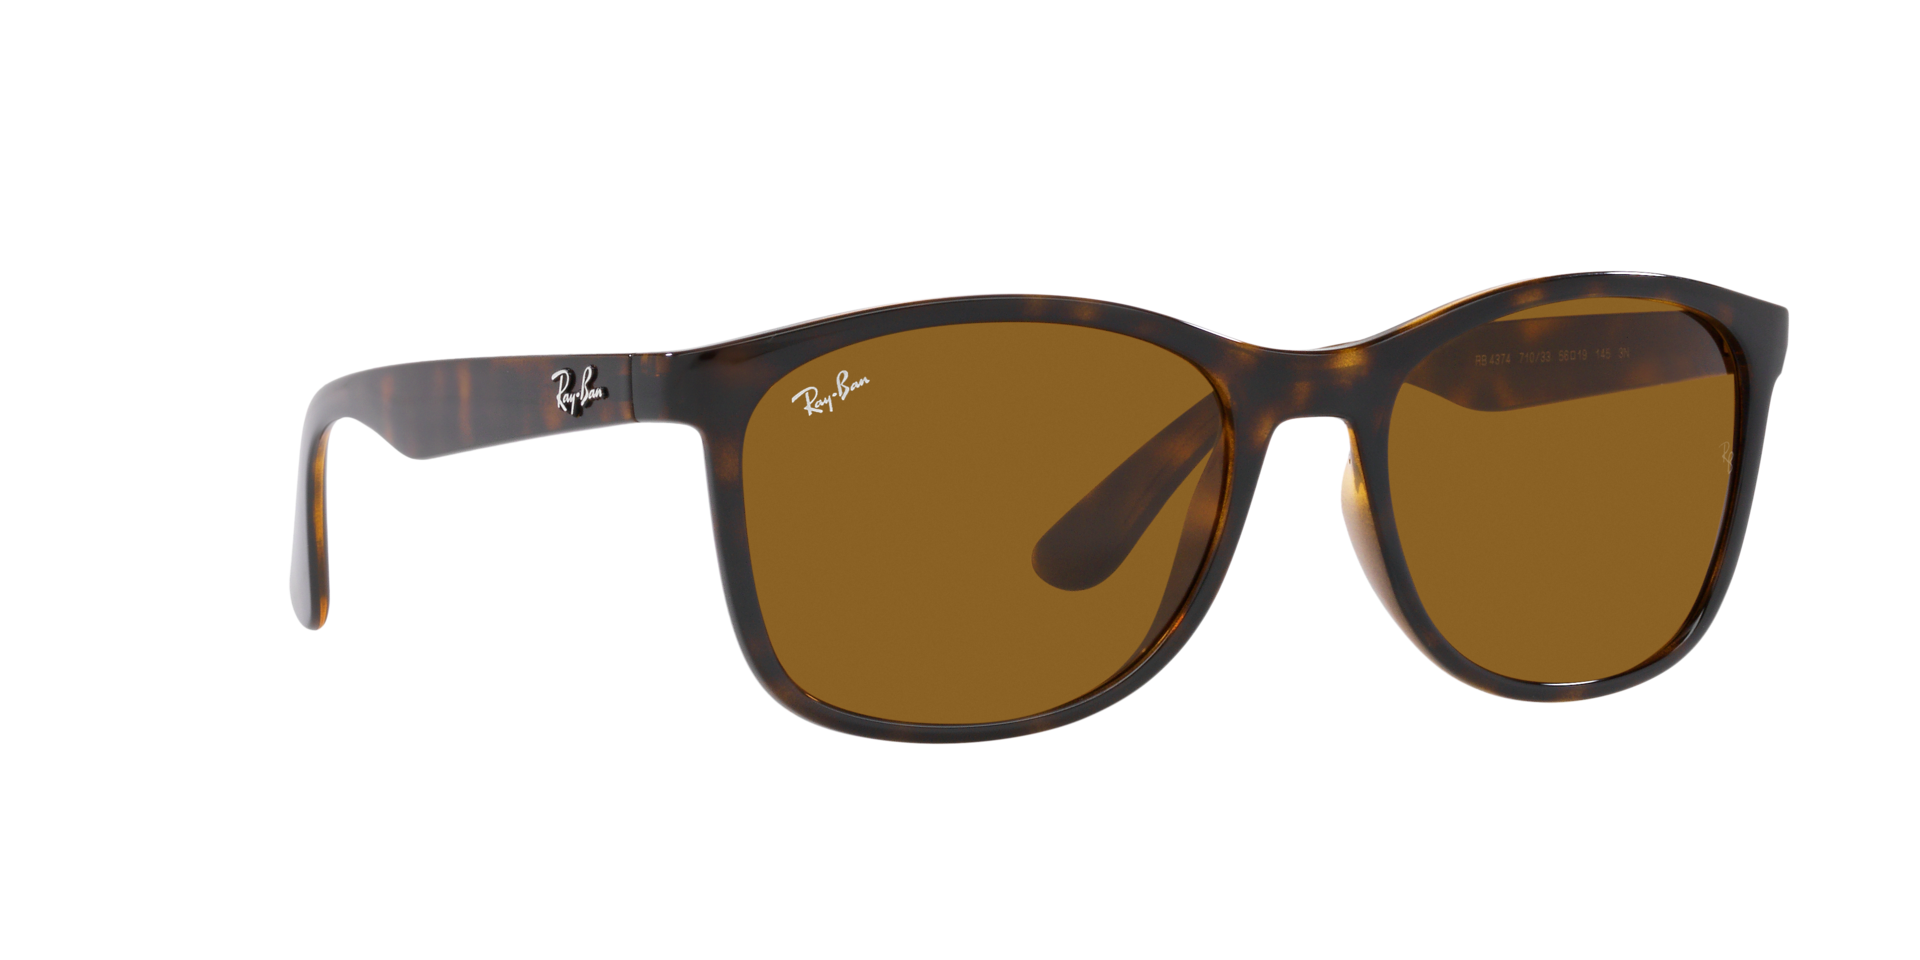 Buy Ray-Ban Rb4374 Sunglasses Online.